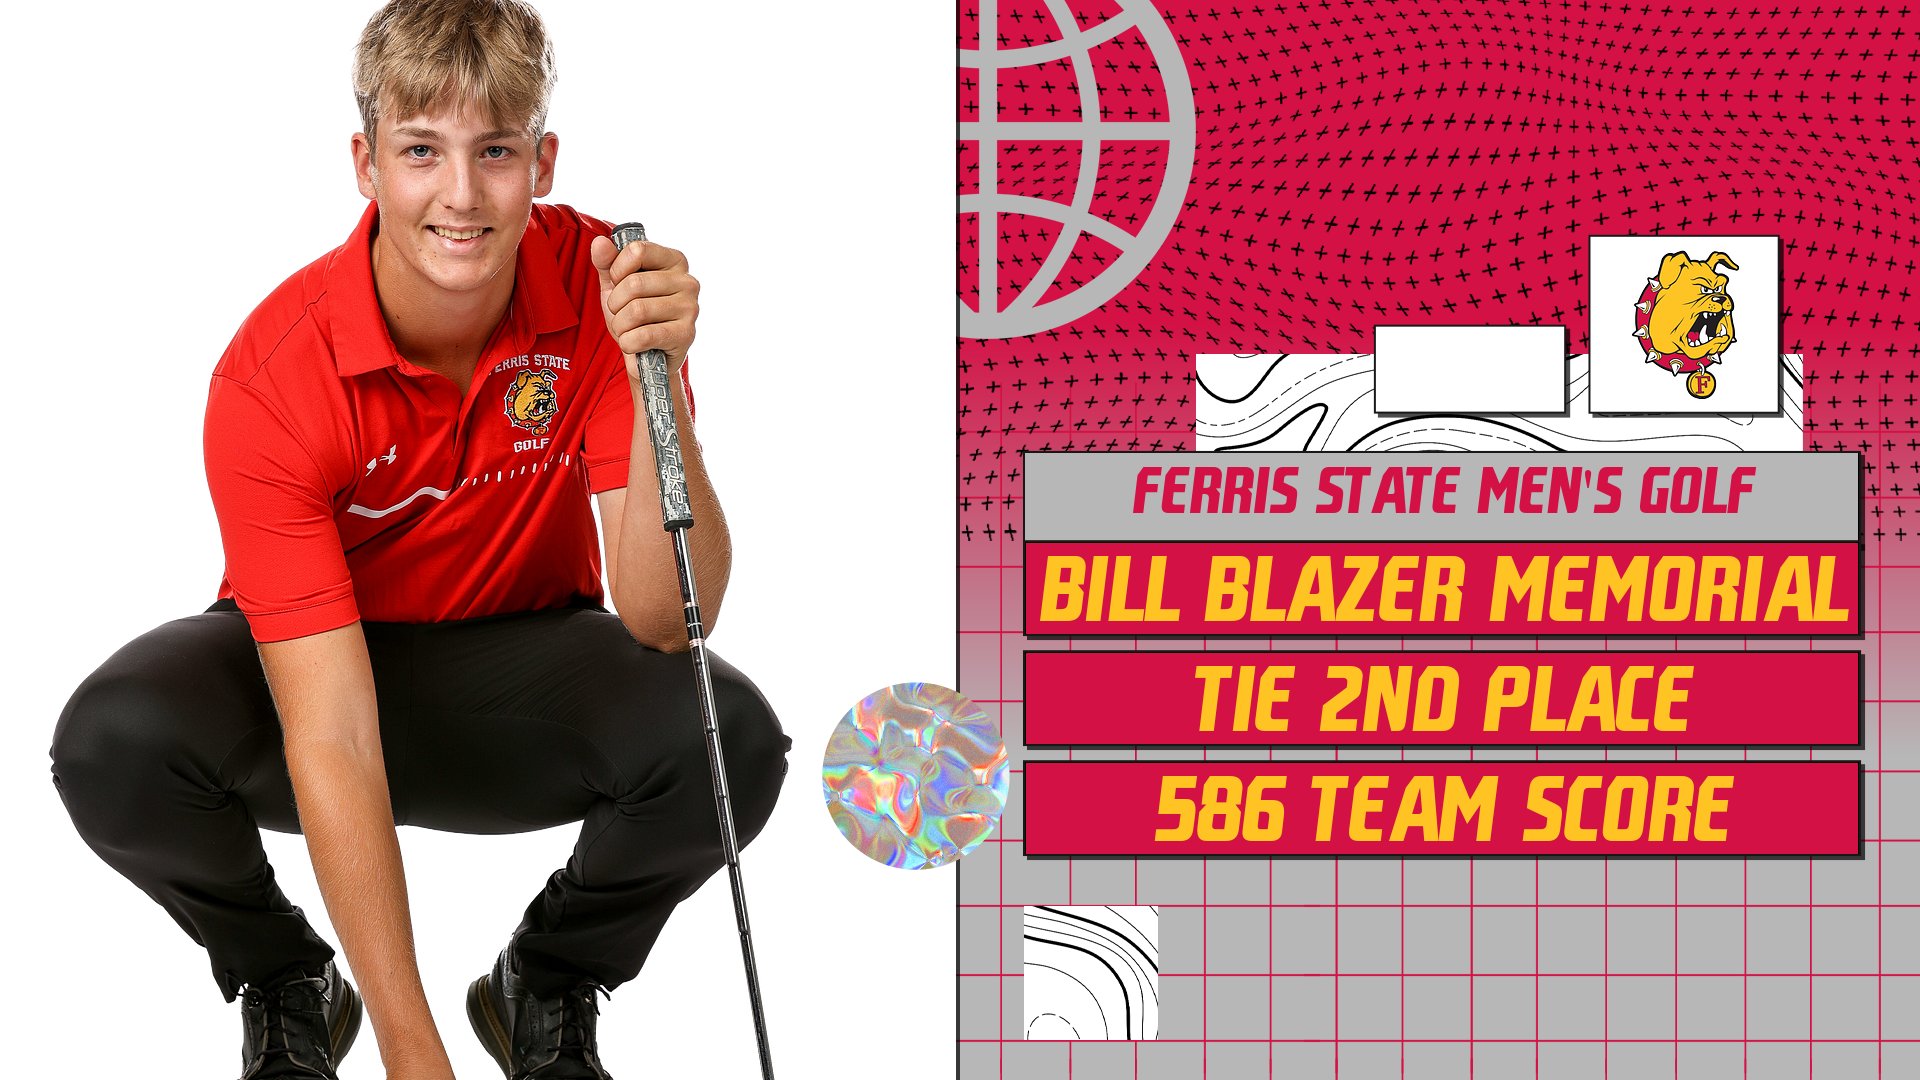 Ferris State Men's Golf Moves Up To Tie For Runner-Up Honors At Bill Blazer Memorial